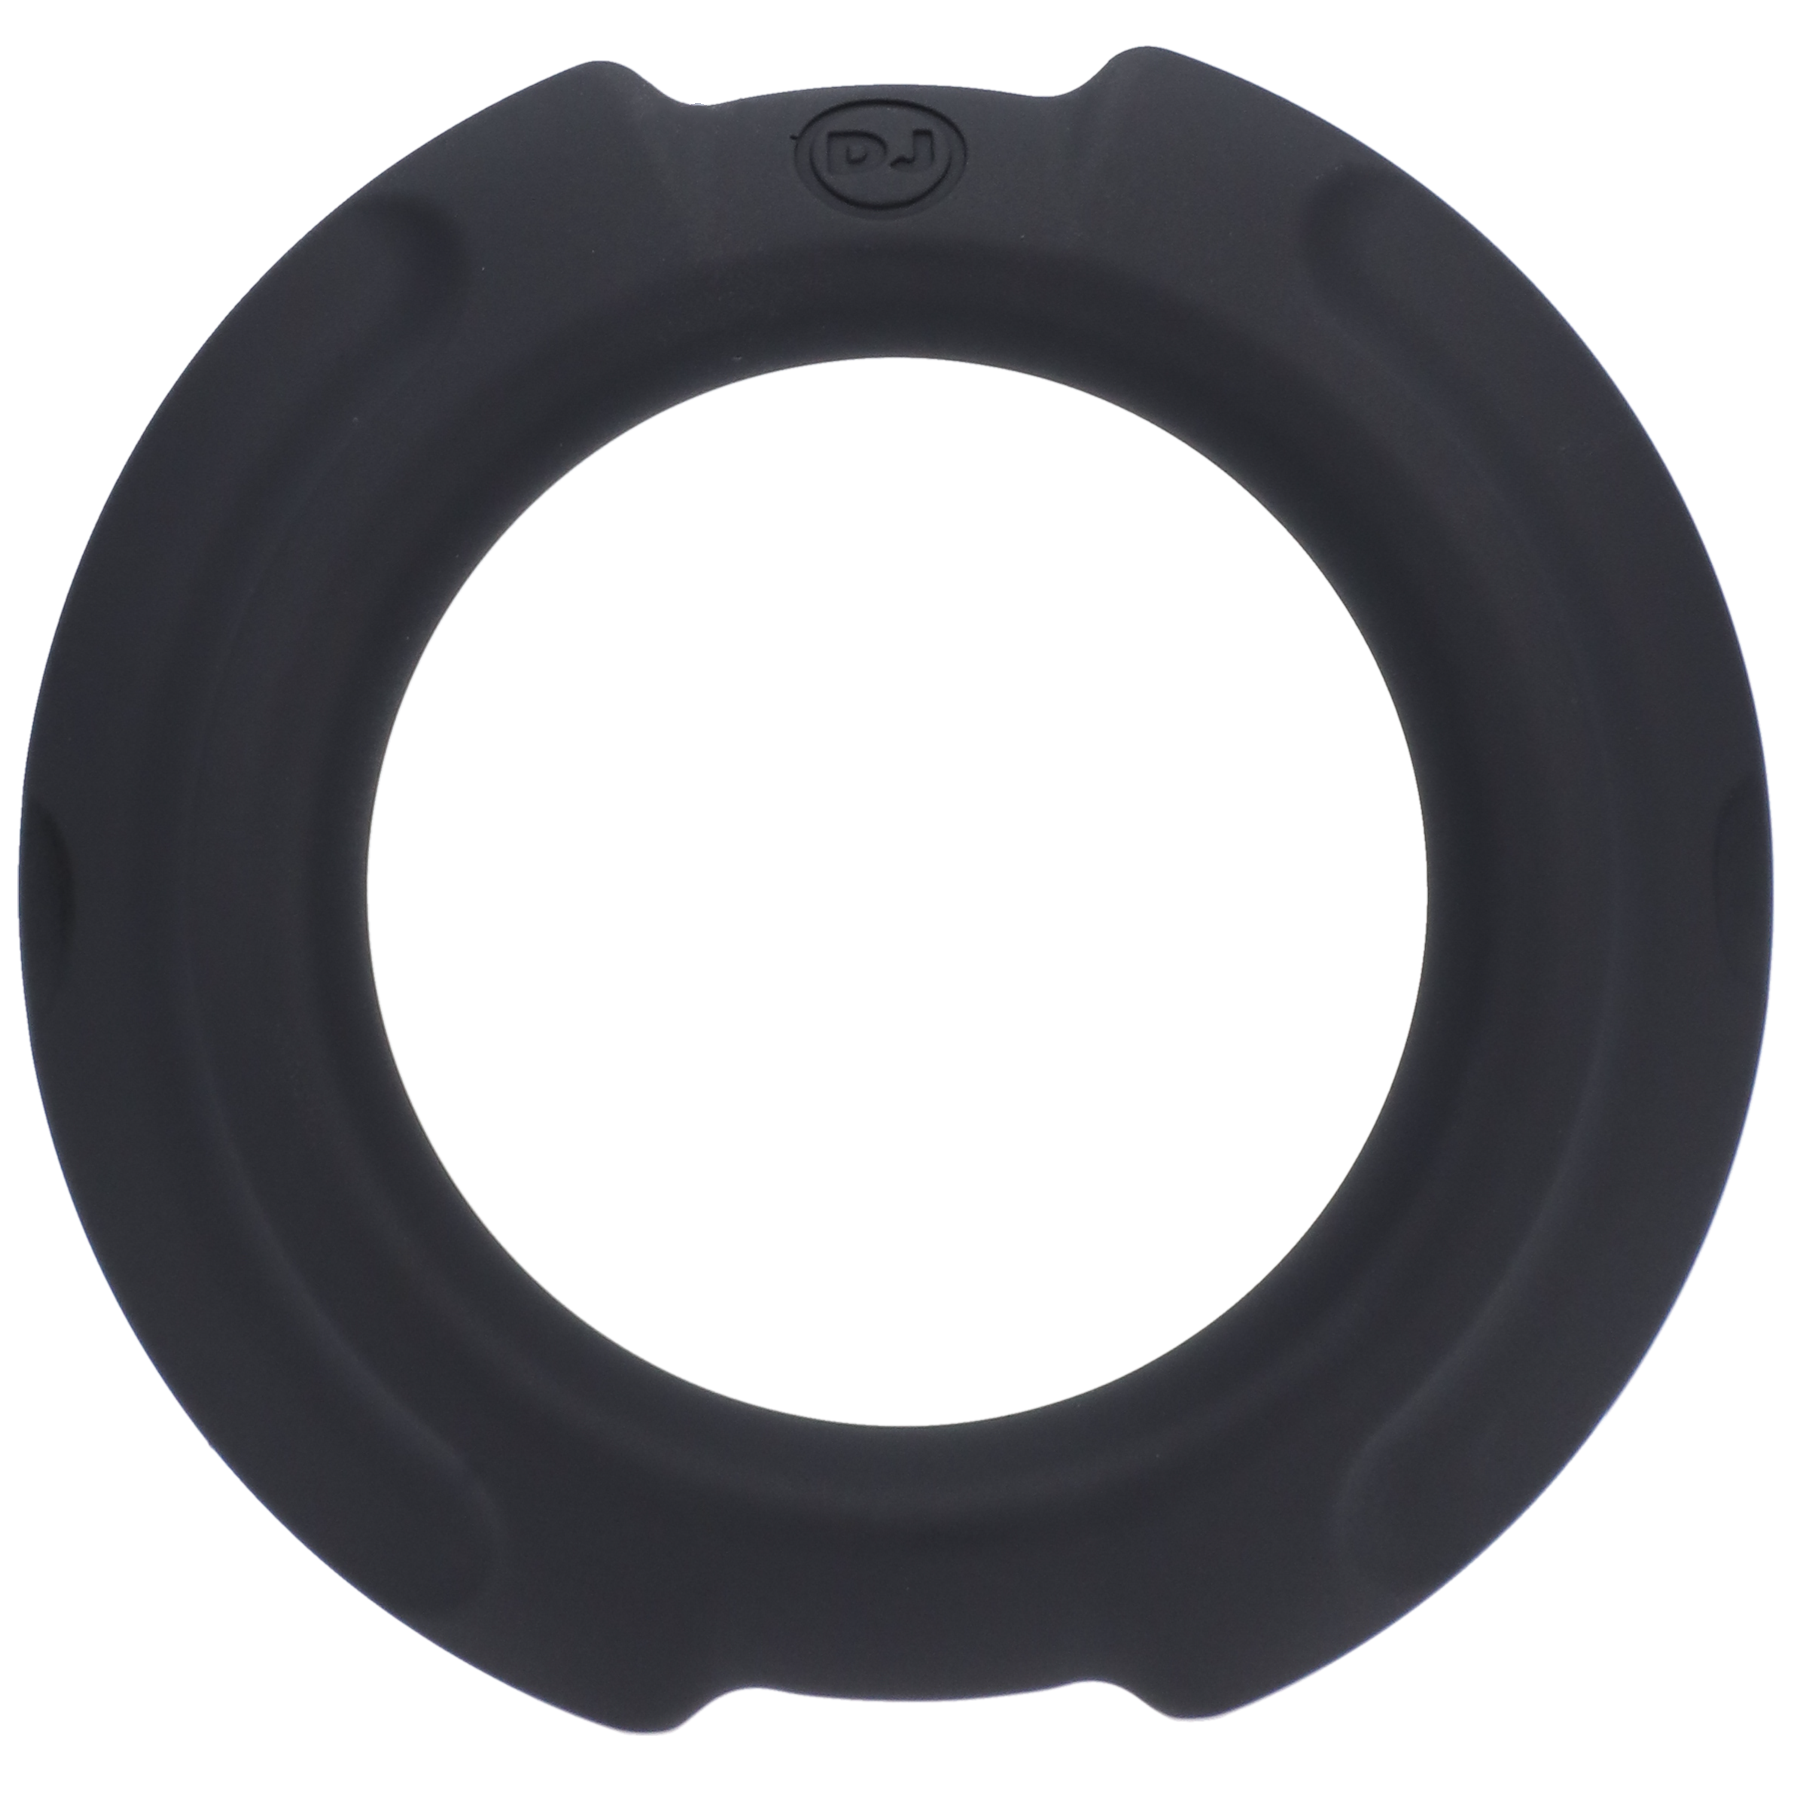 OptiMALE FlexiSteel Silicone C-Ring - 43mm, Black - Thorn & Feather